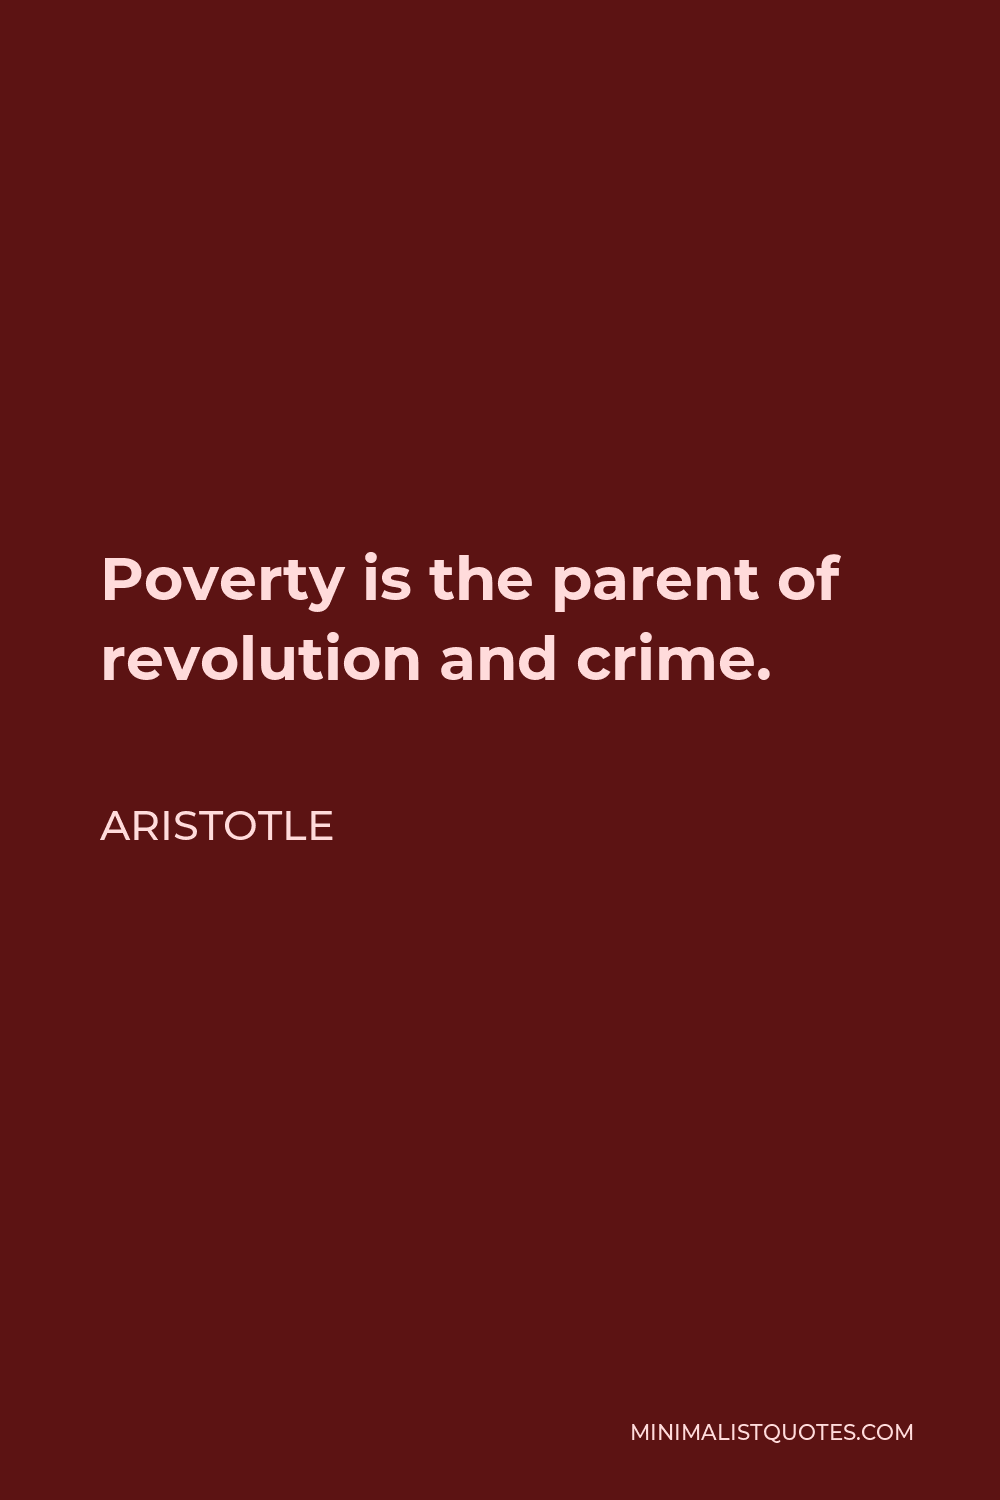 Aristotle Quote - Poverty is the parent of revolution and crime.